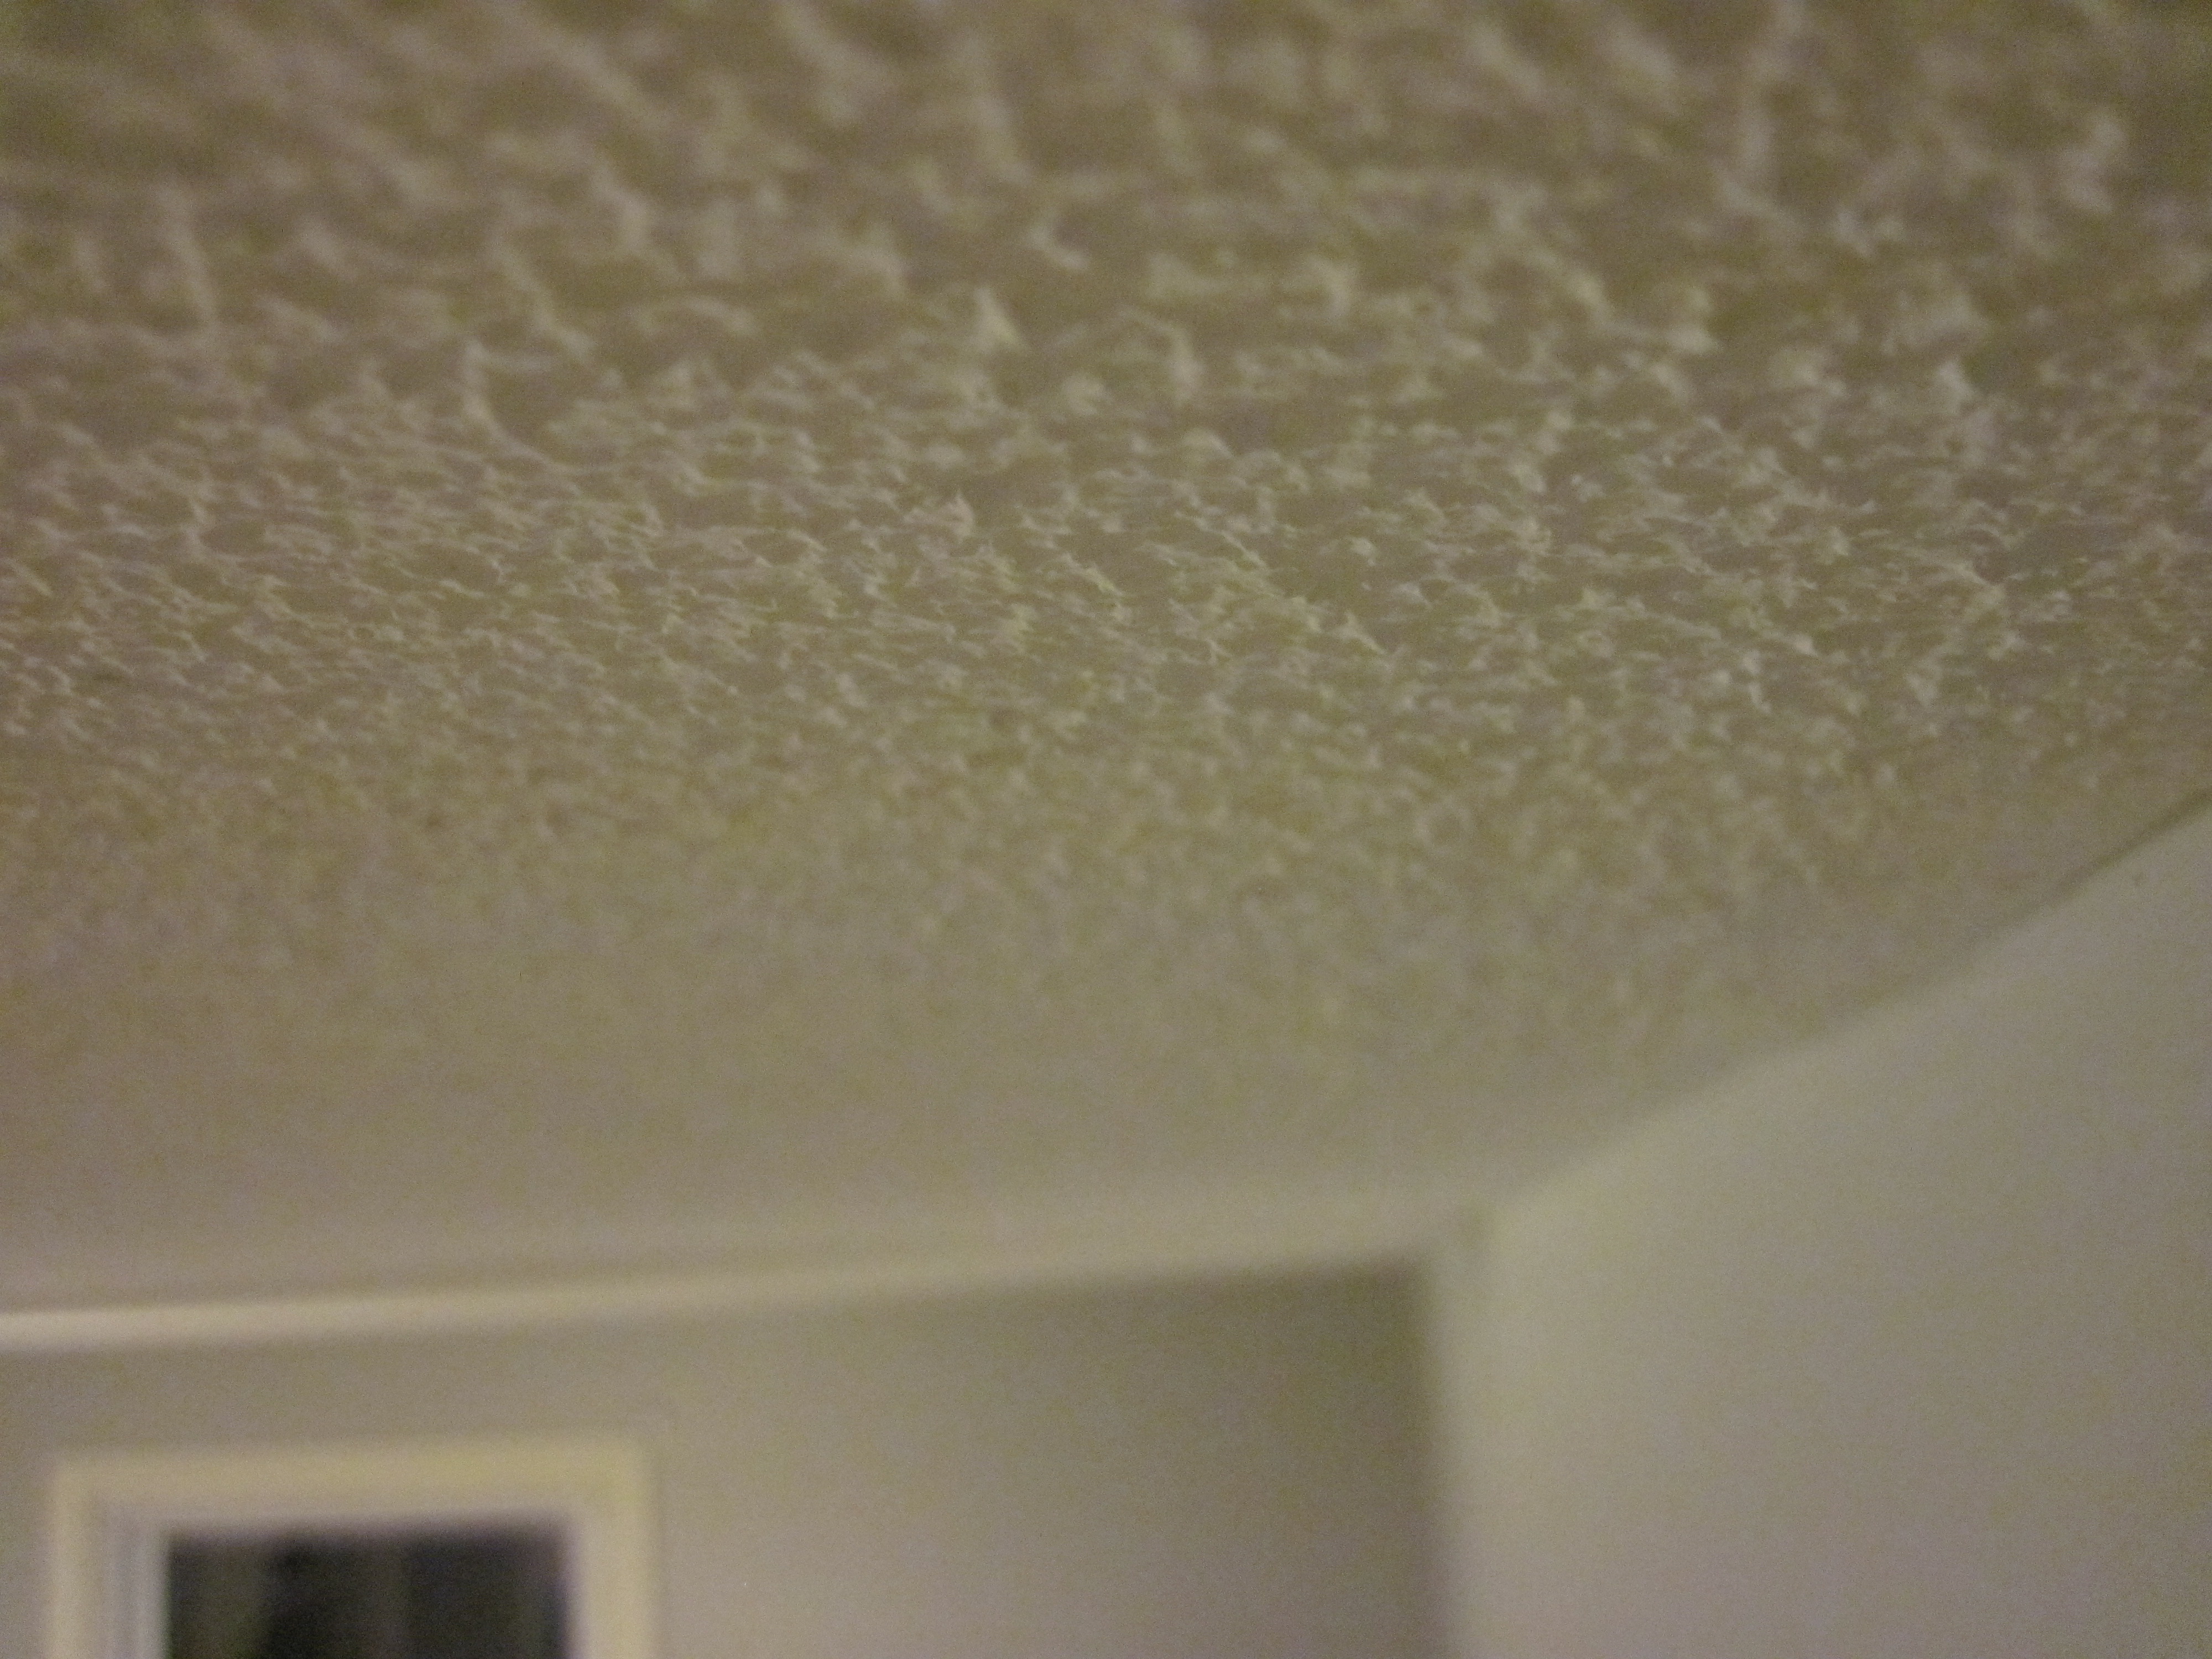 How to Remove Wallpaper or Popcorn Ceilings 4000x3000